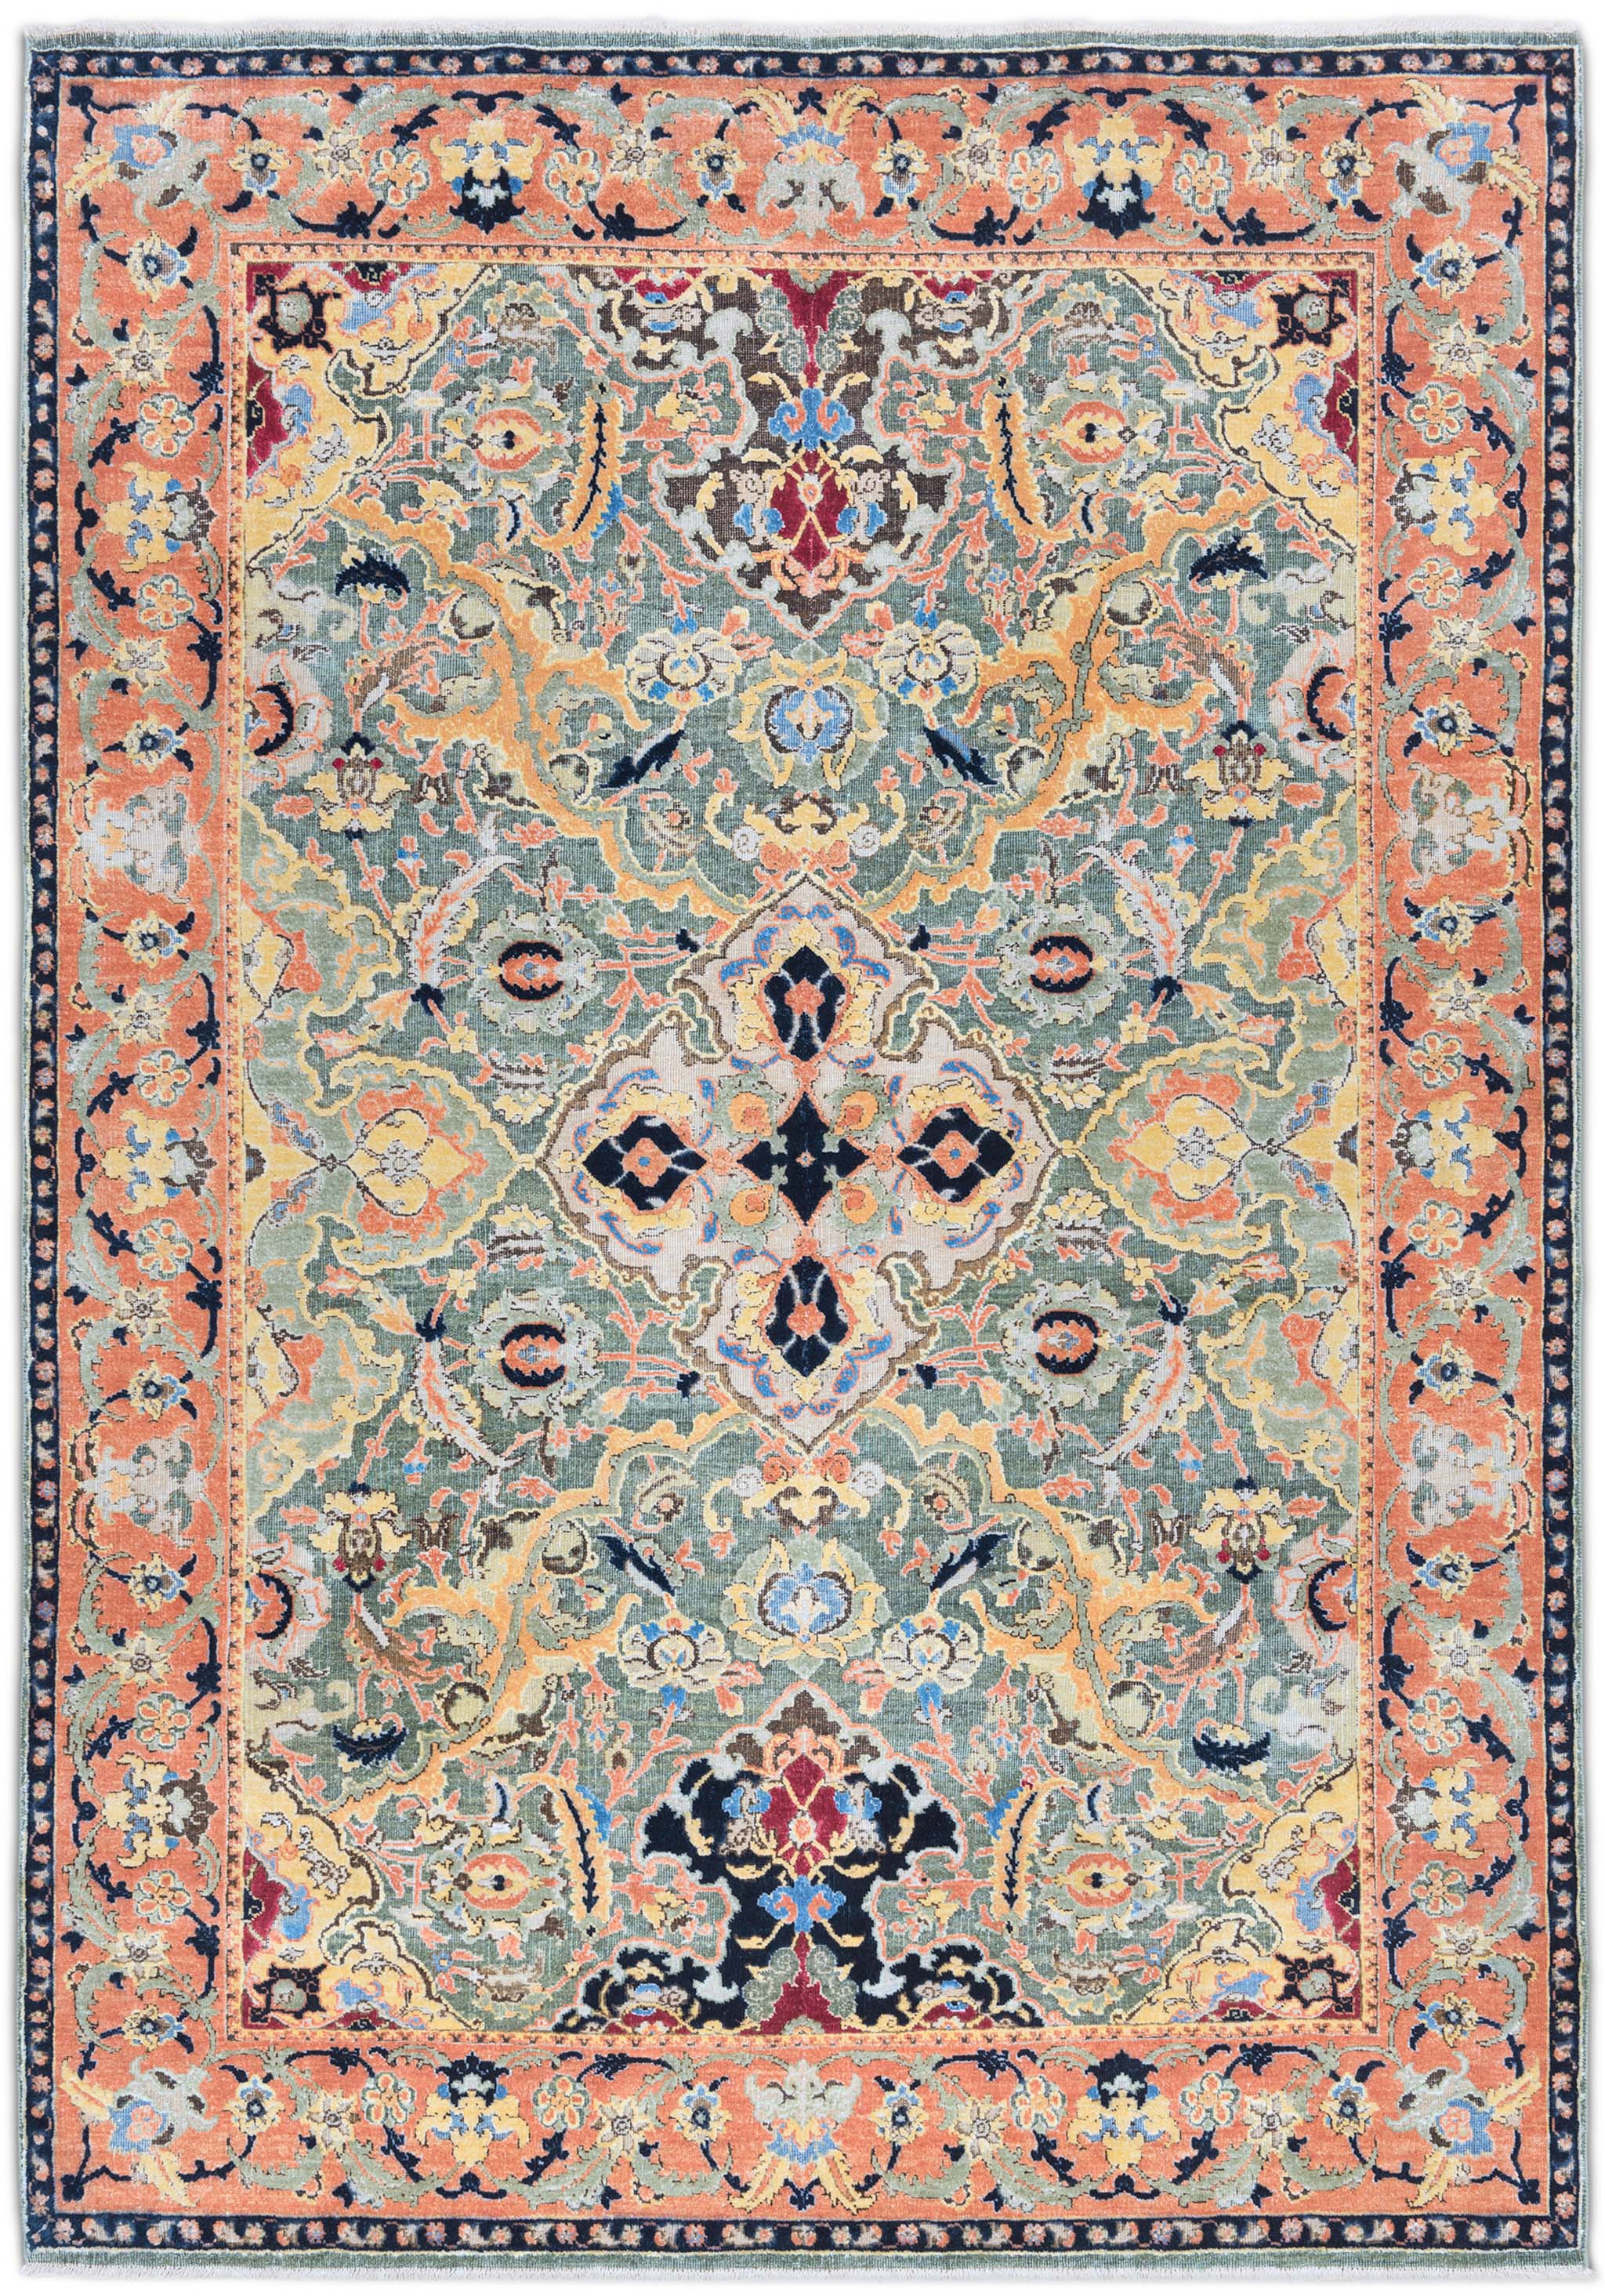 'Polonaise No. 3' by Knots Rugs from the firm's 17th Century Classic Collection, introduced in 2016. | Image courtesy of Knots Rugs.